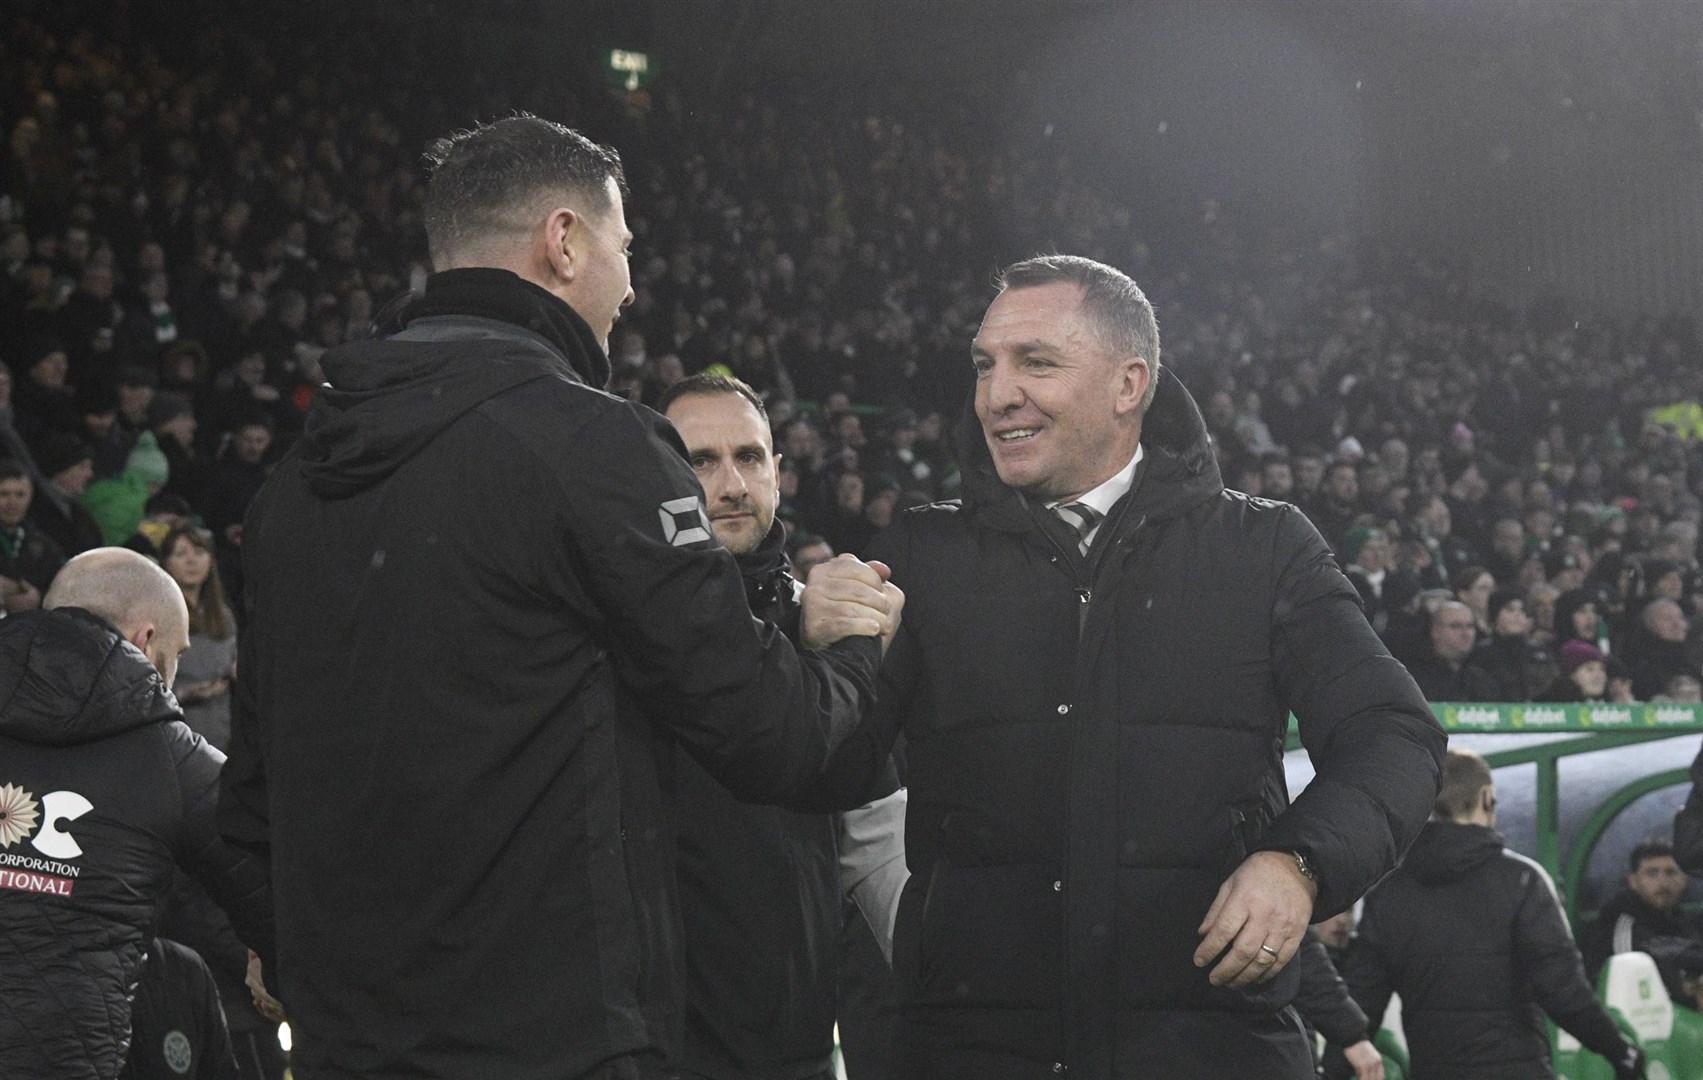 Celtic manager Brendan Rodgers and Buckie Thistle boss Graeme Stewart embrace at Parkhead. Picture: Daniel Forsyth